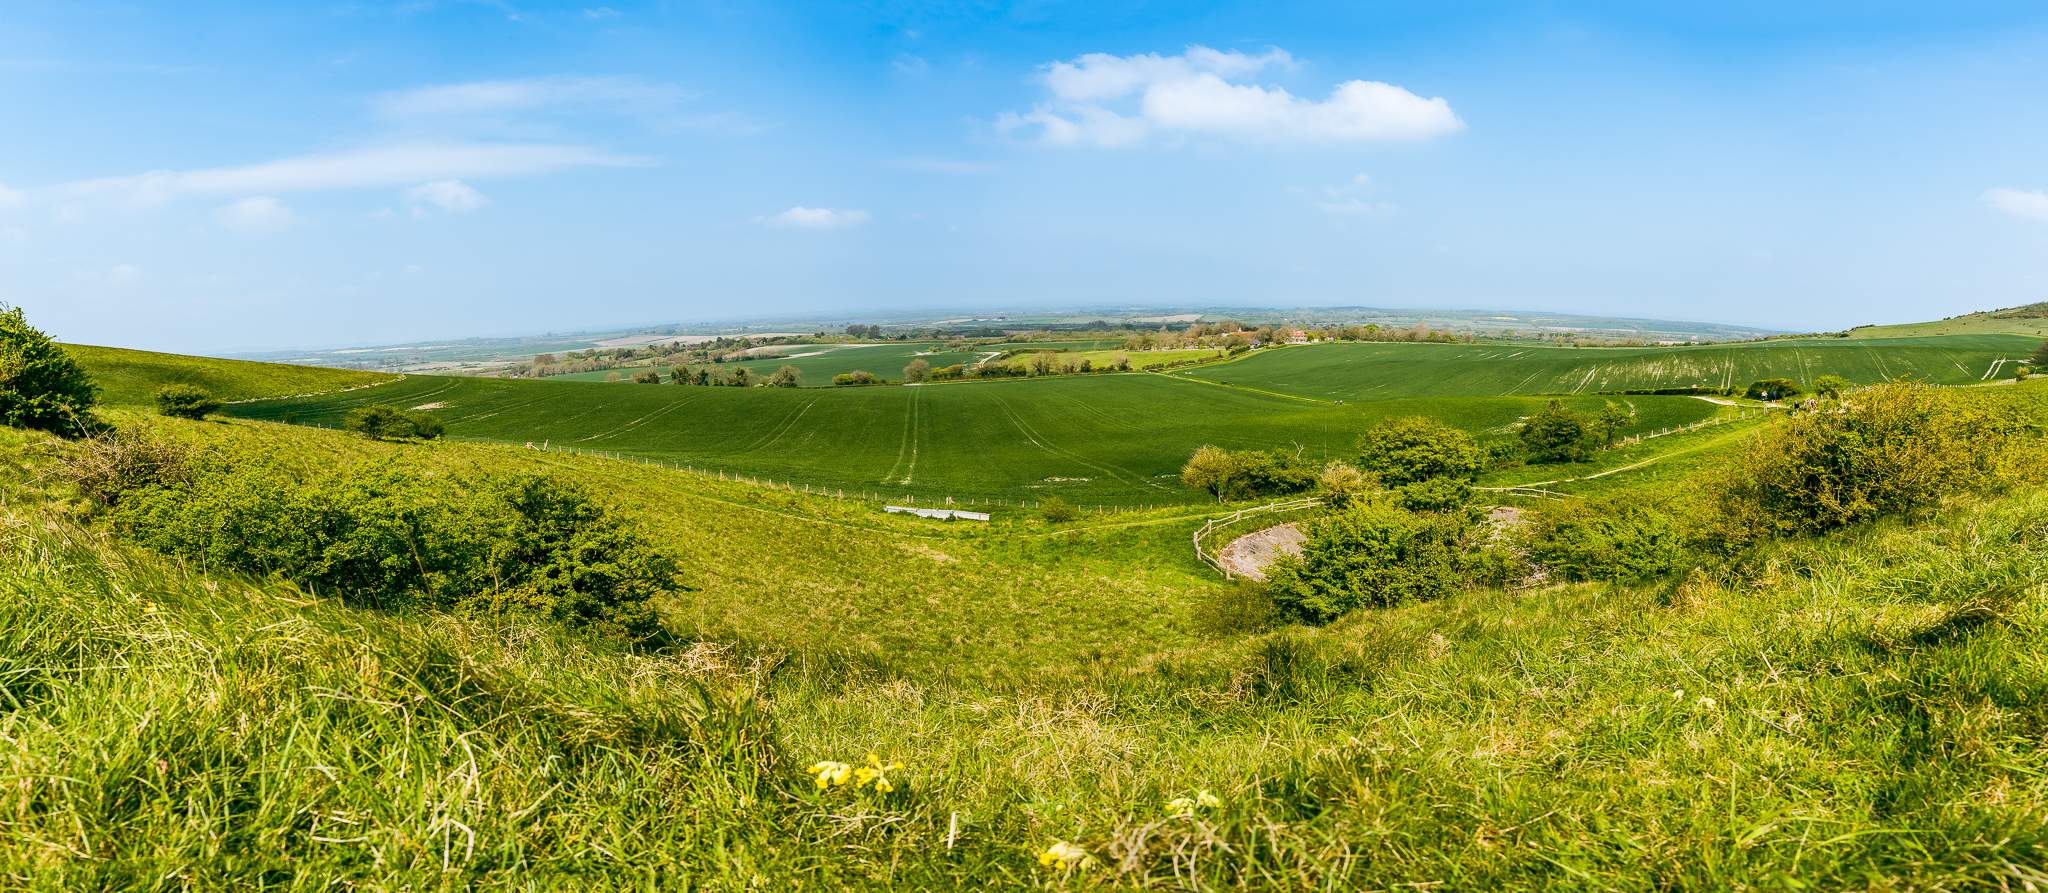 Panoramic view towards North from the base hill under the Long Man, Wilmington, East Sussex, England, UK